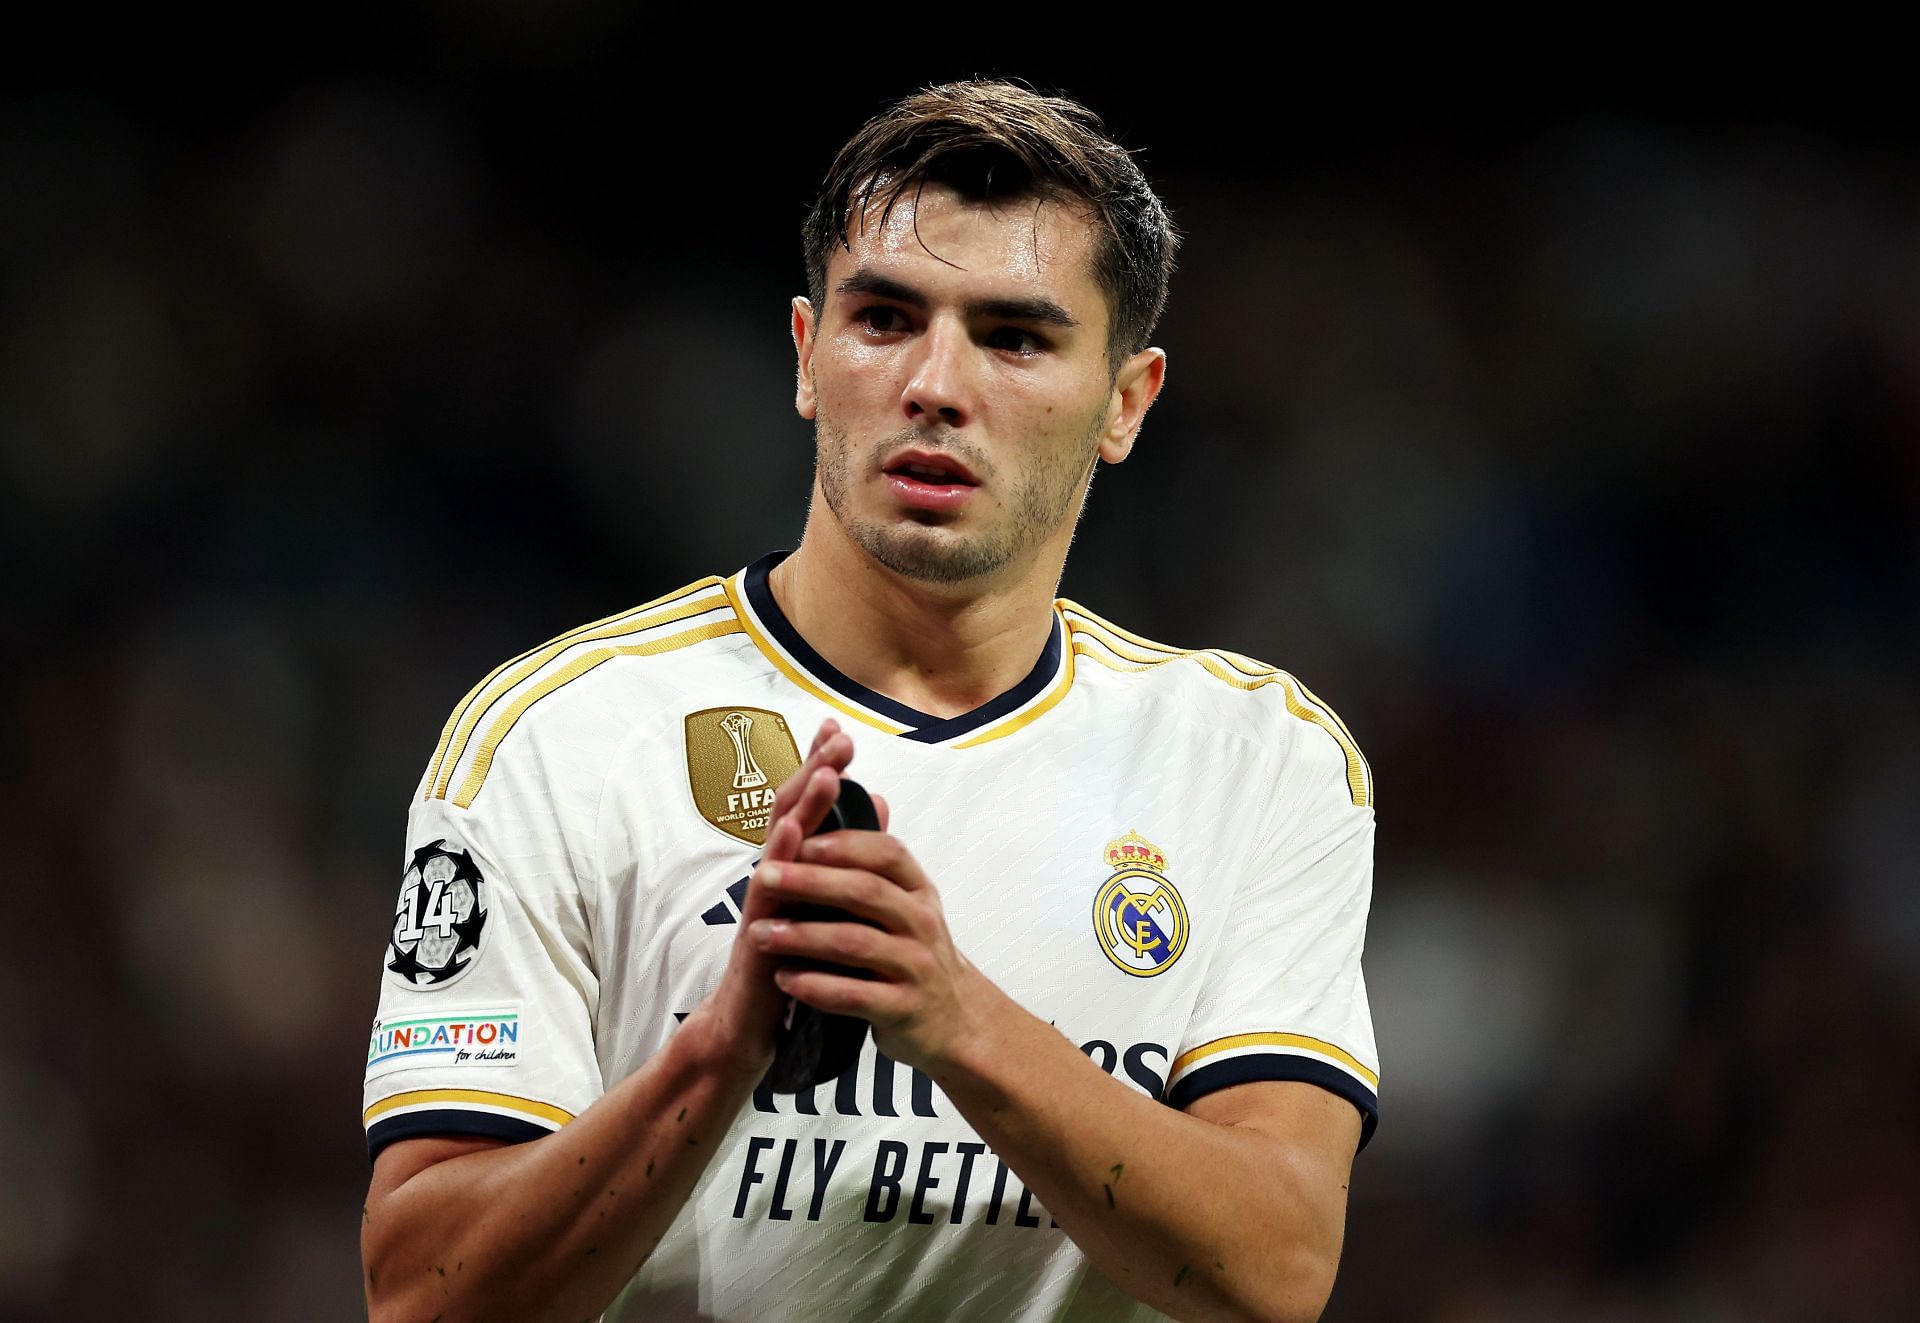 Brahim Diaz has been impressing for Real Madrid.